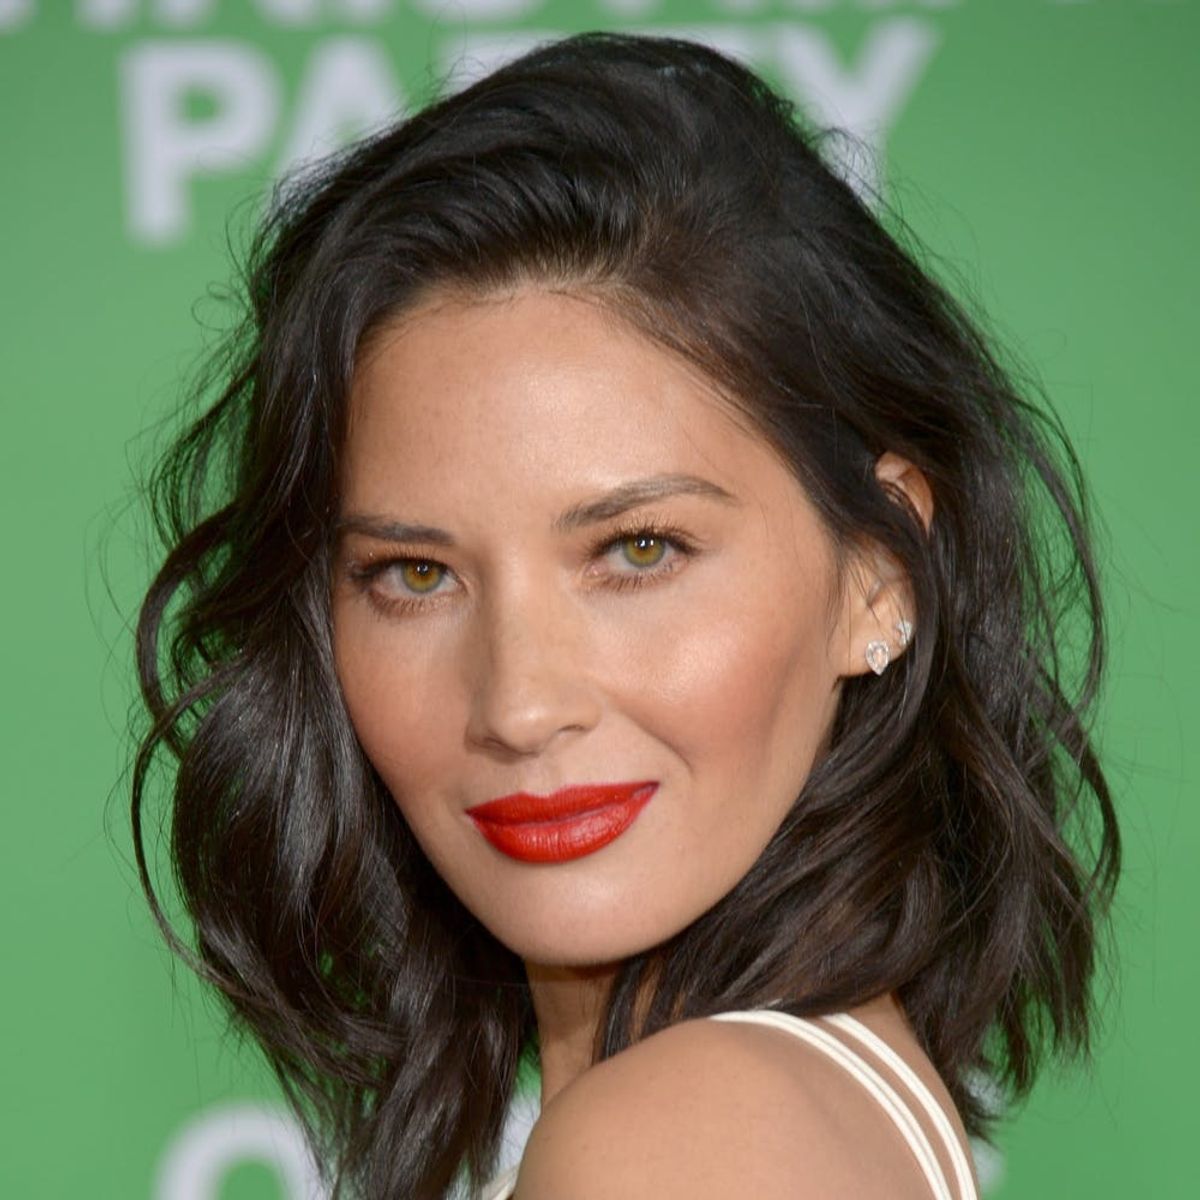 Olivia Munn’s Wine-Colored Lips Are Getting Us Excited for Fall Already